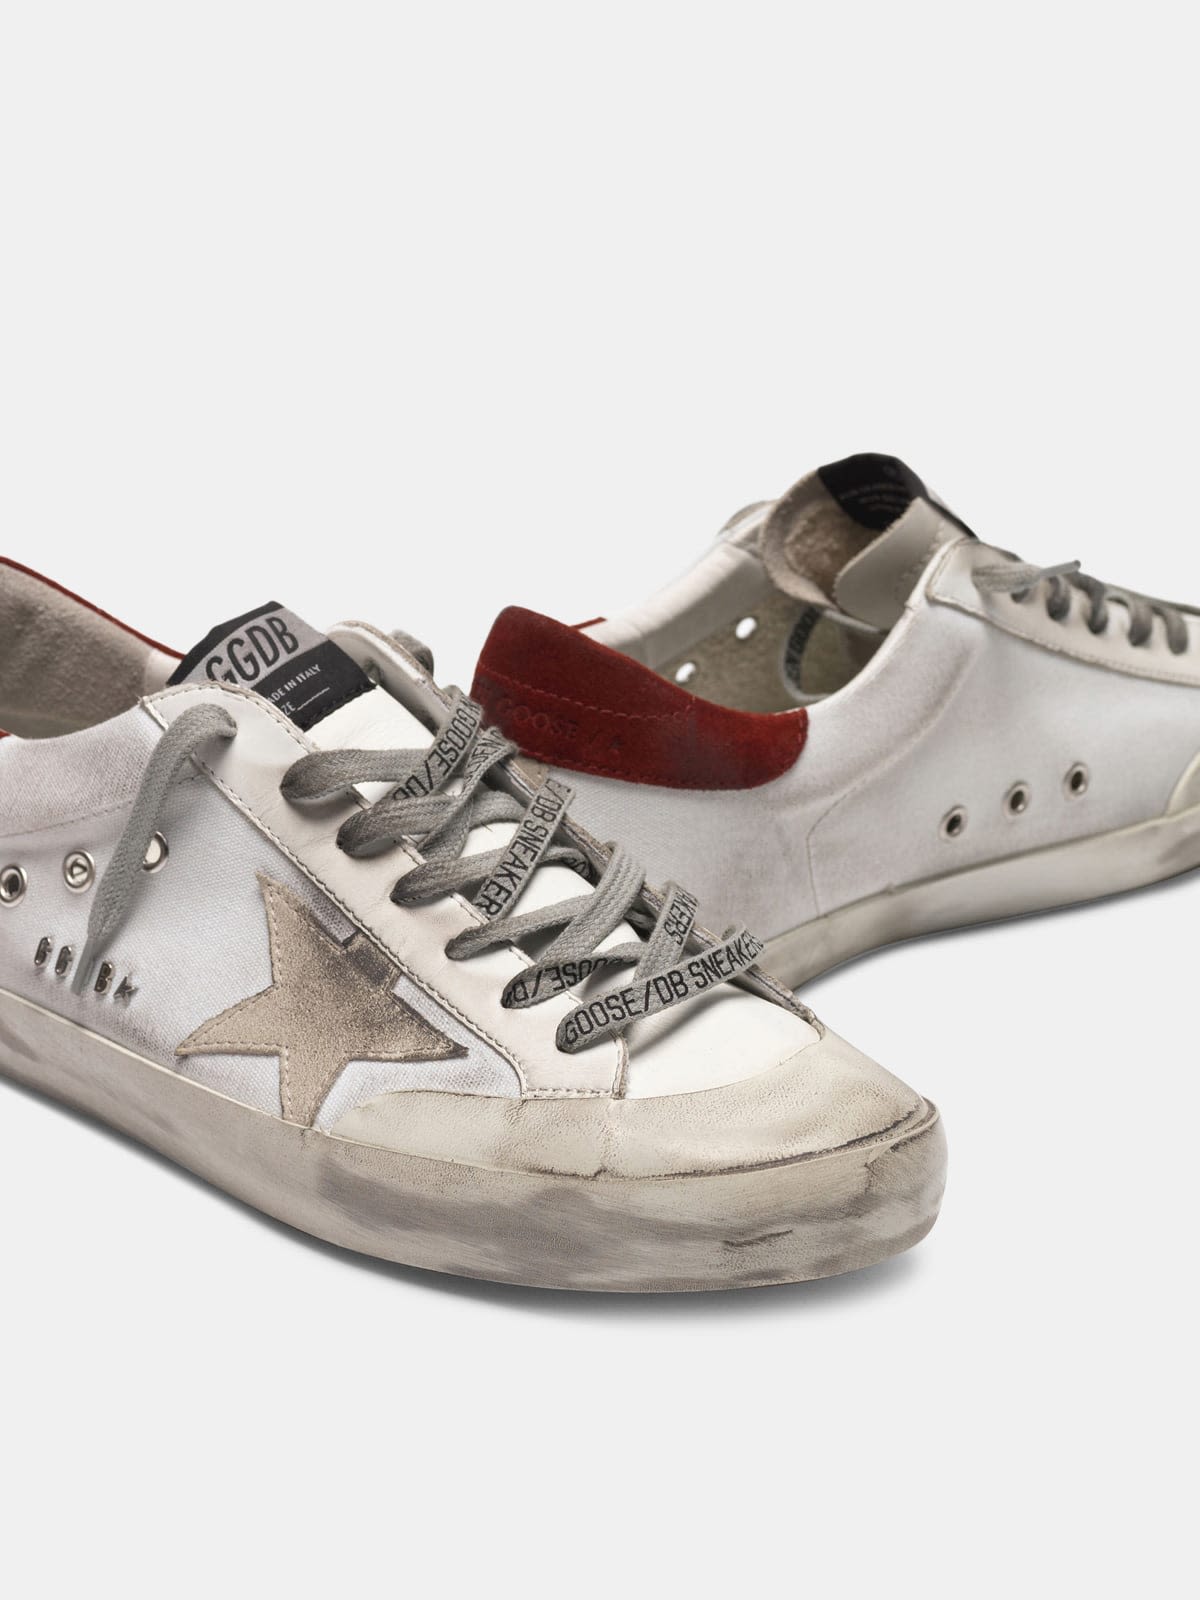 Super-Star sneakers with rubber toe cap